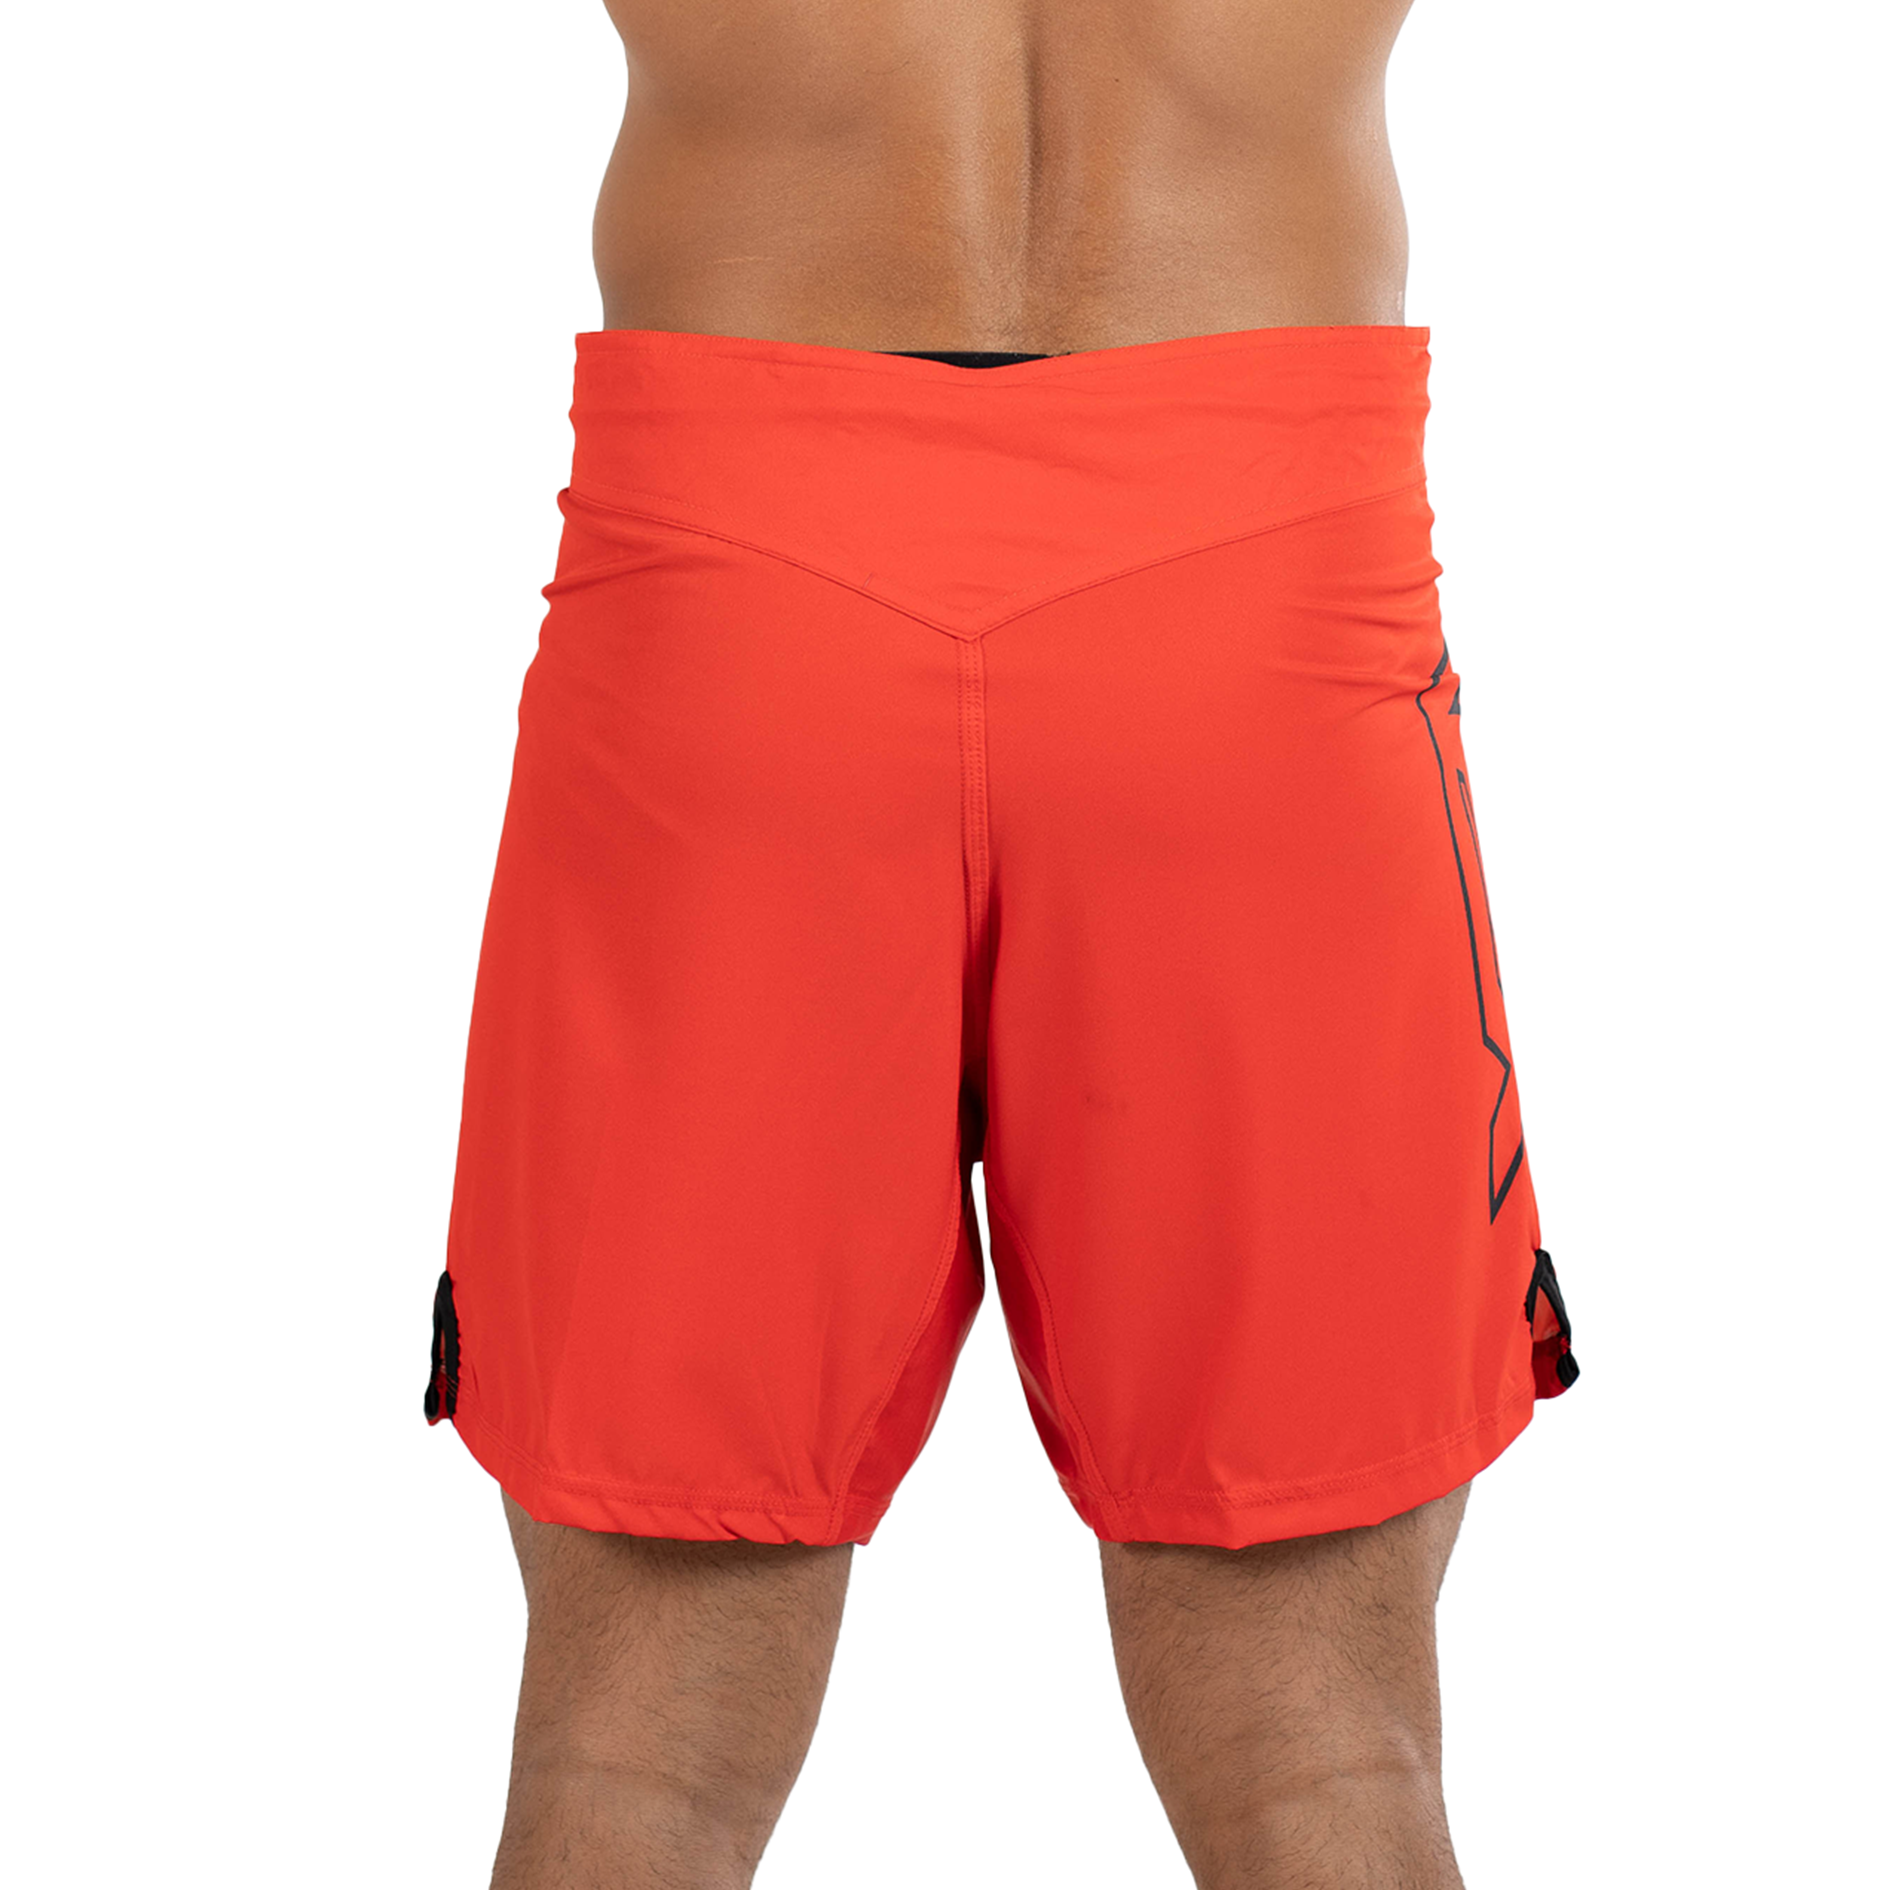 VEX MMA Shorts (RED)